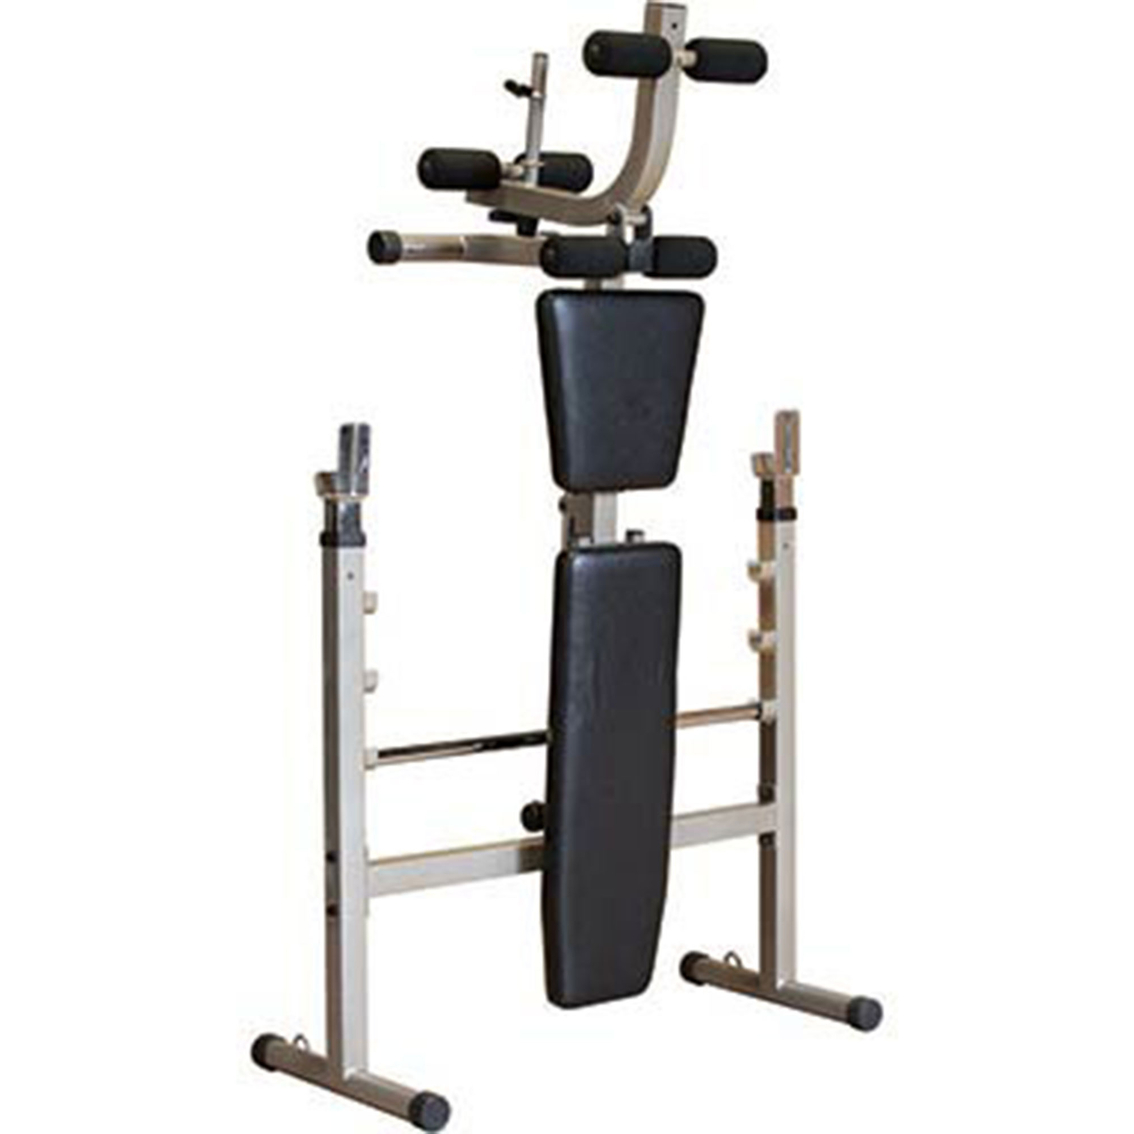 Body-Solid Best Fitness Olympic Folding Bench - Image 2 of 2